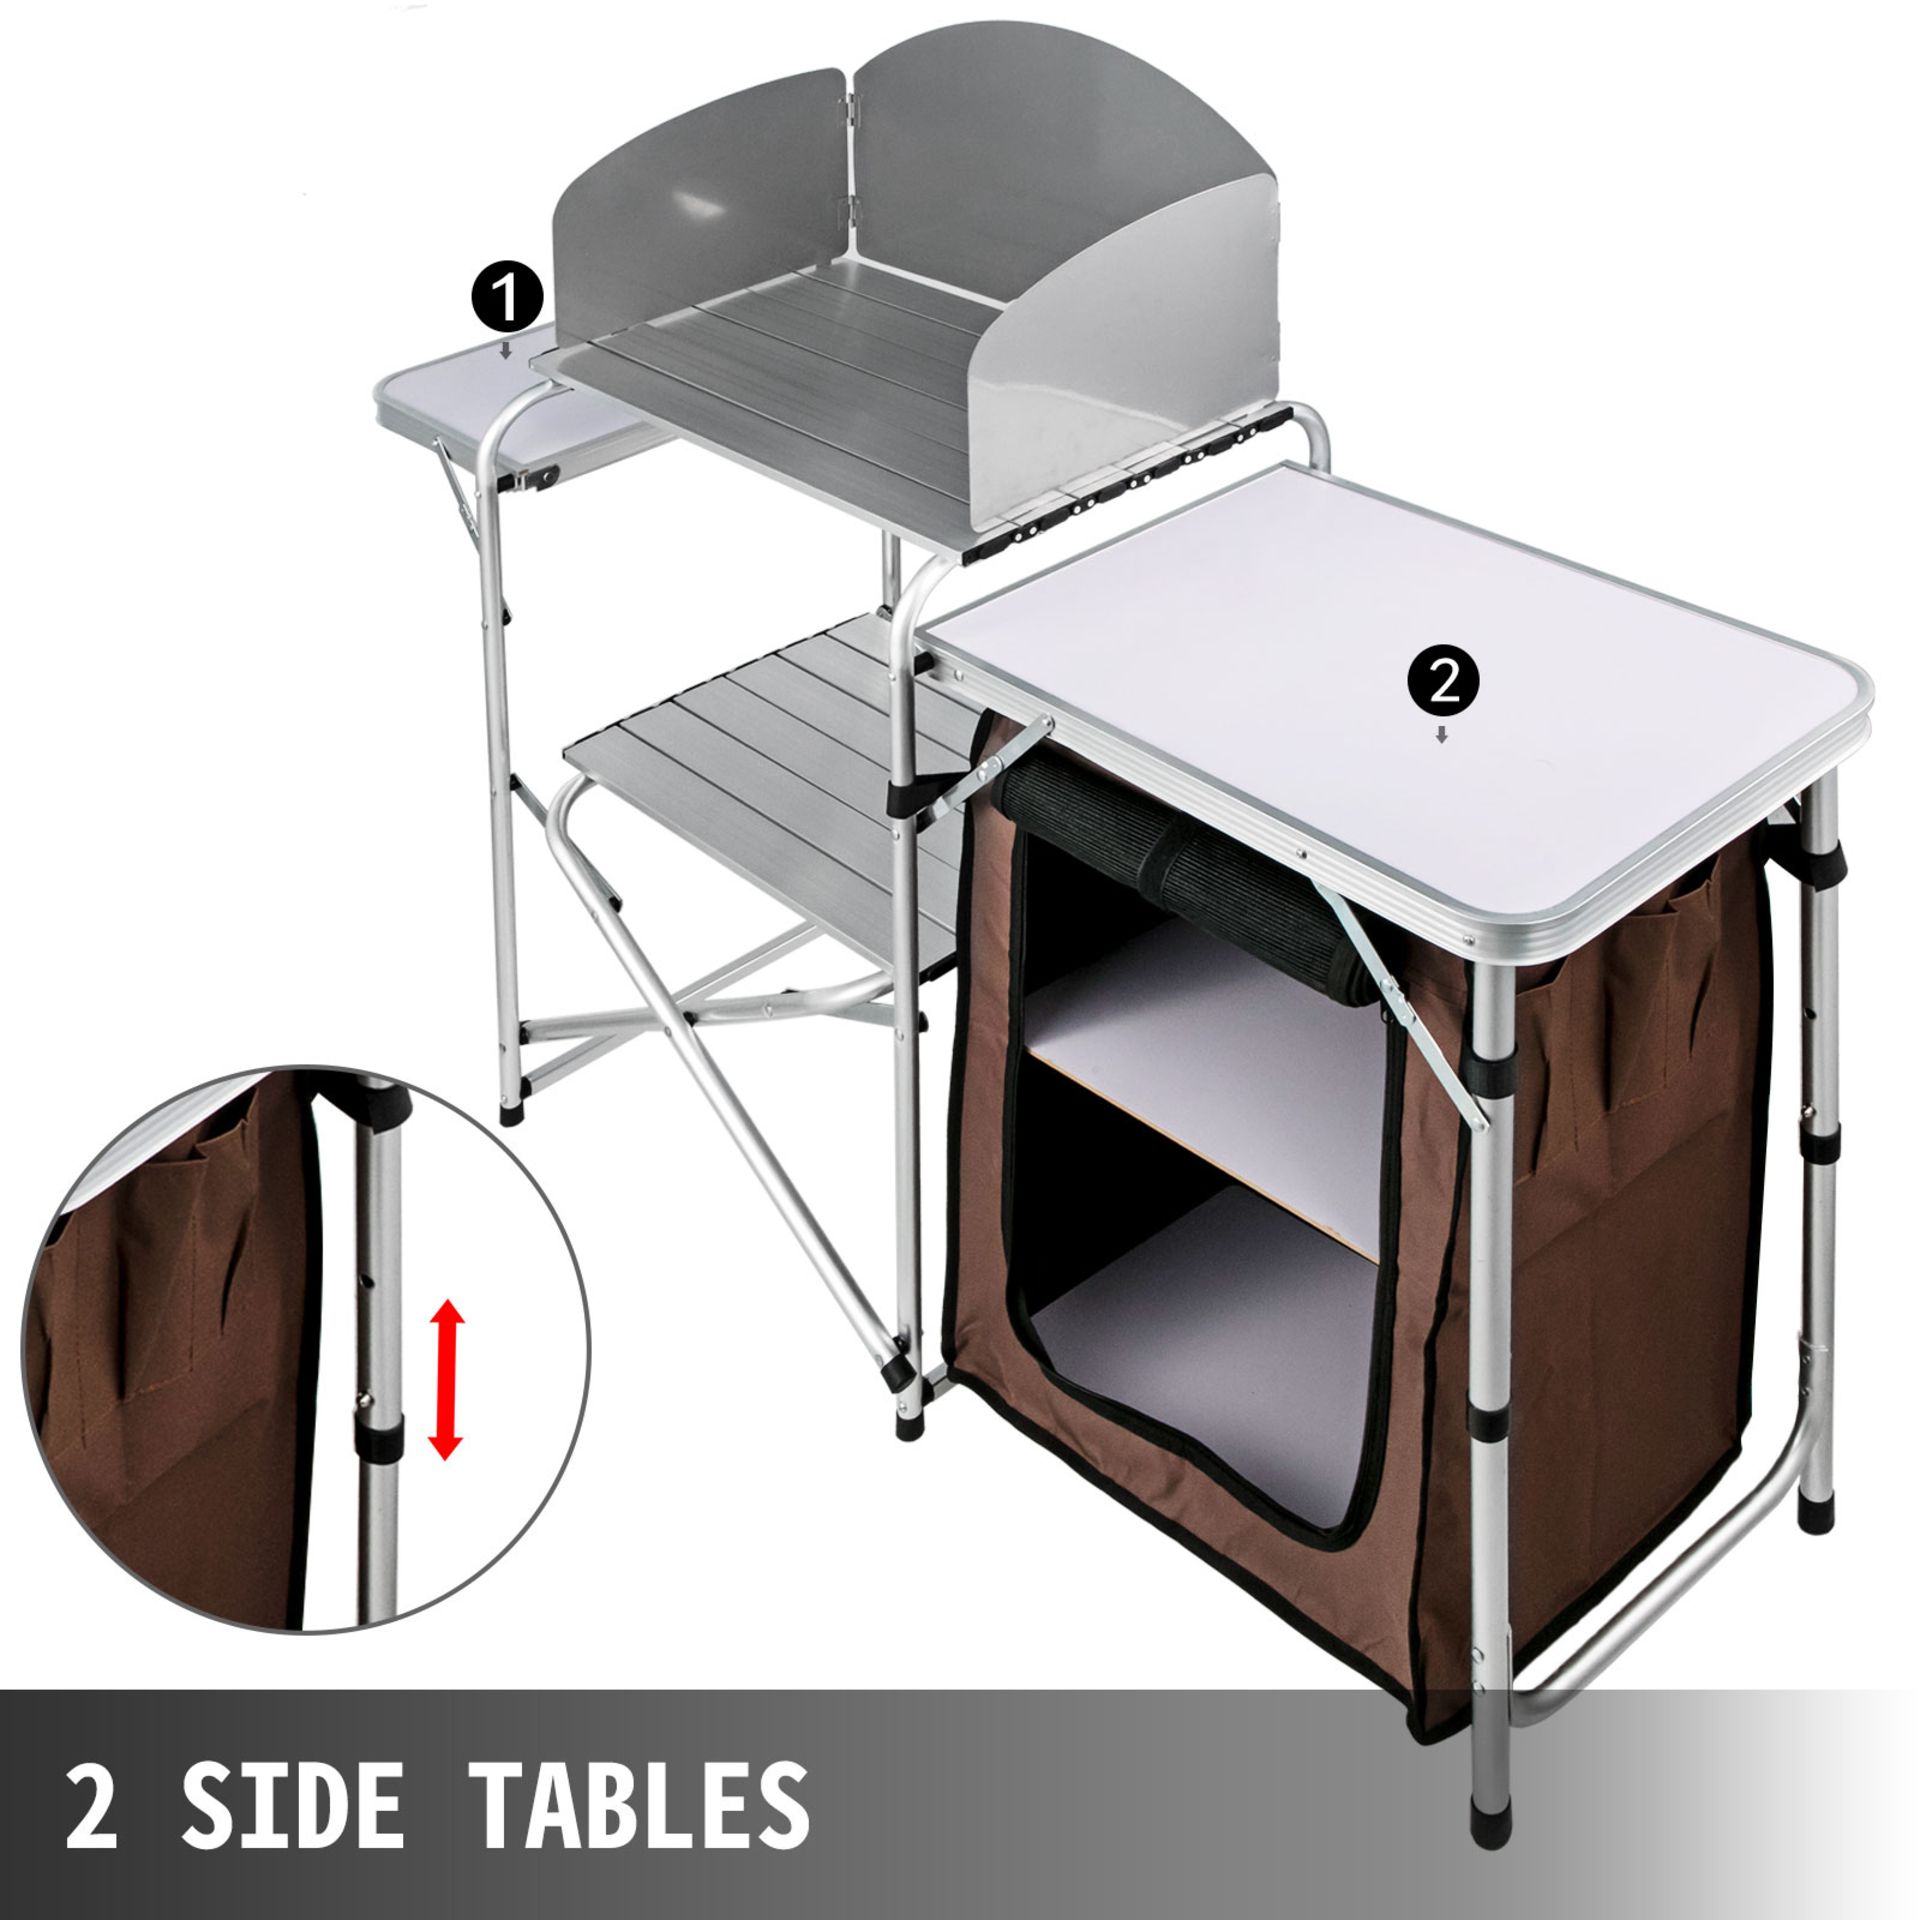 PORTABLE OUTDOOR COLLAPSIBLE KITCHEN PREP TABLE (NEW) (MSRP $225) - Bild 4 aus 5